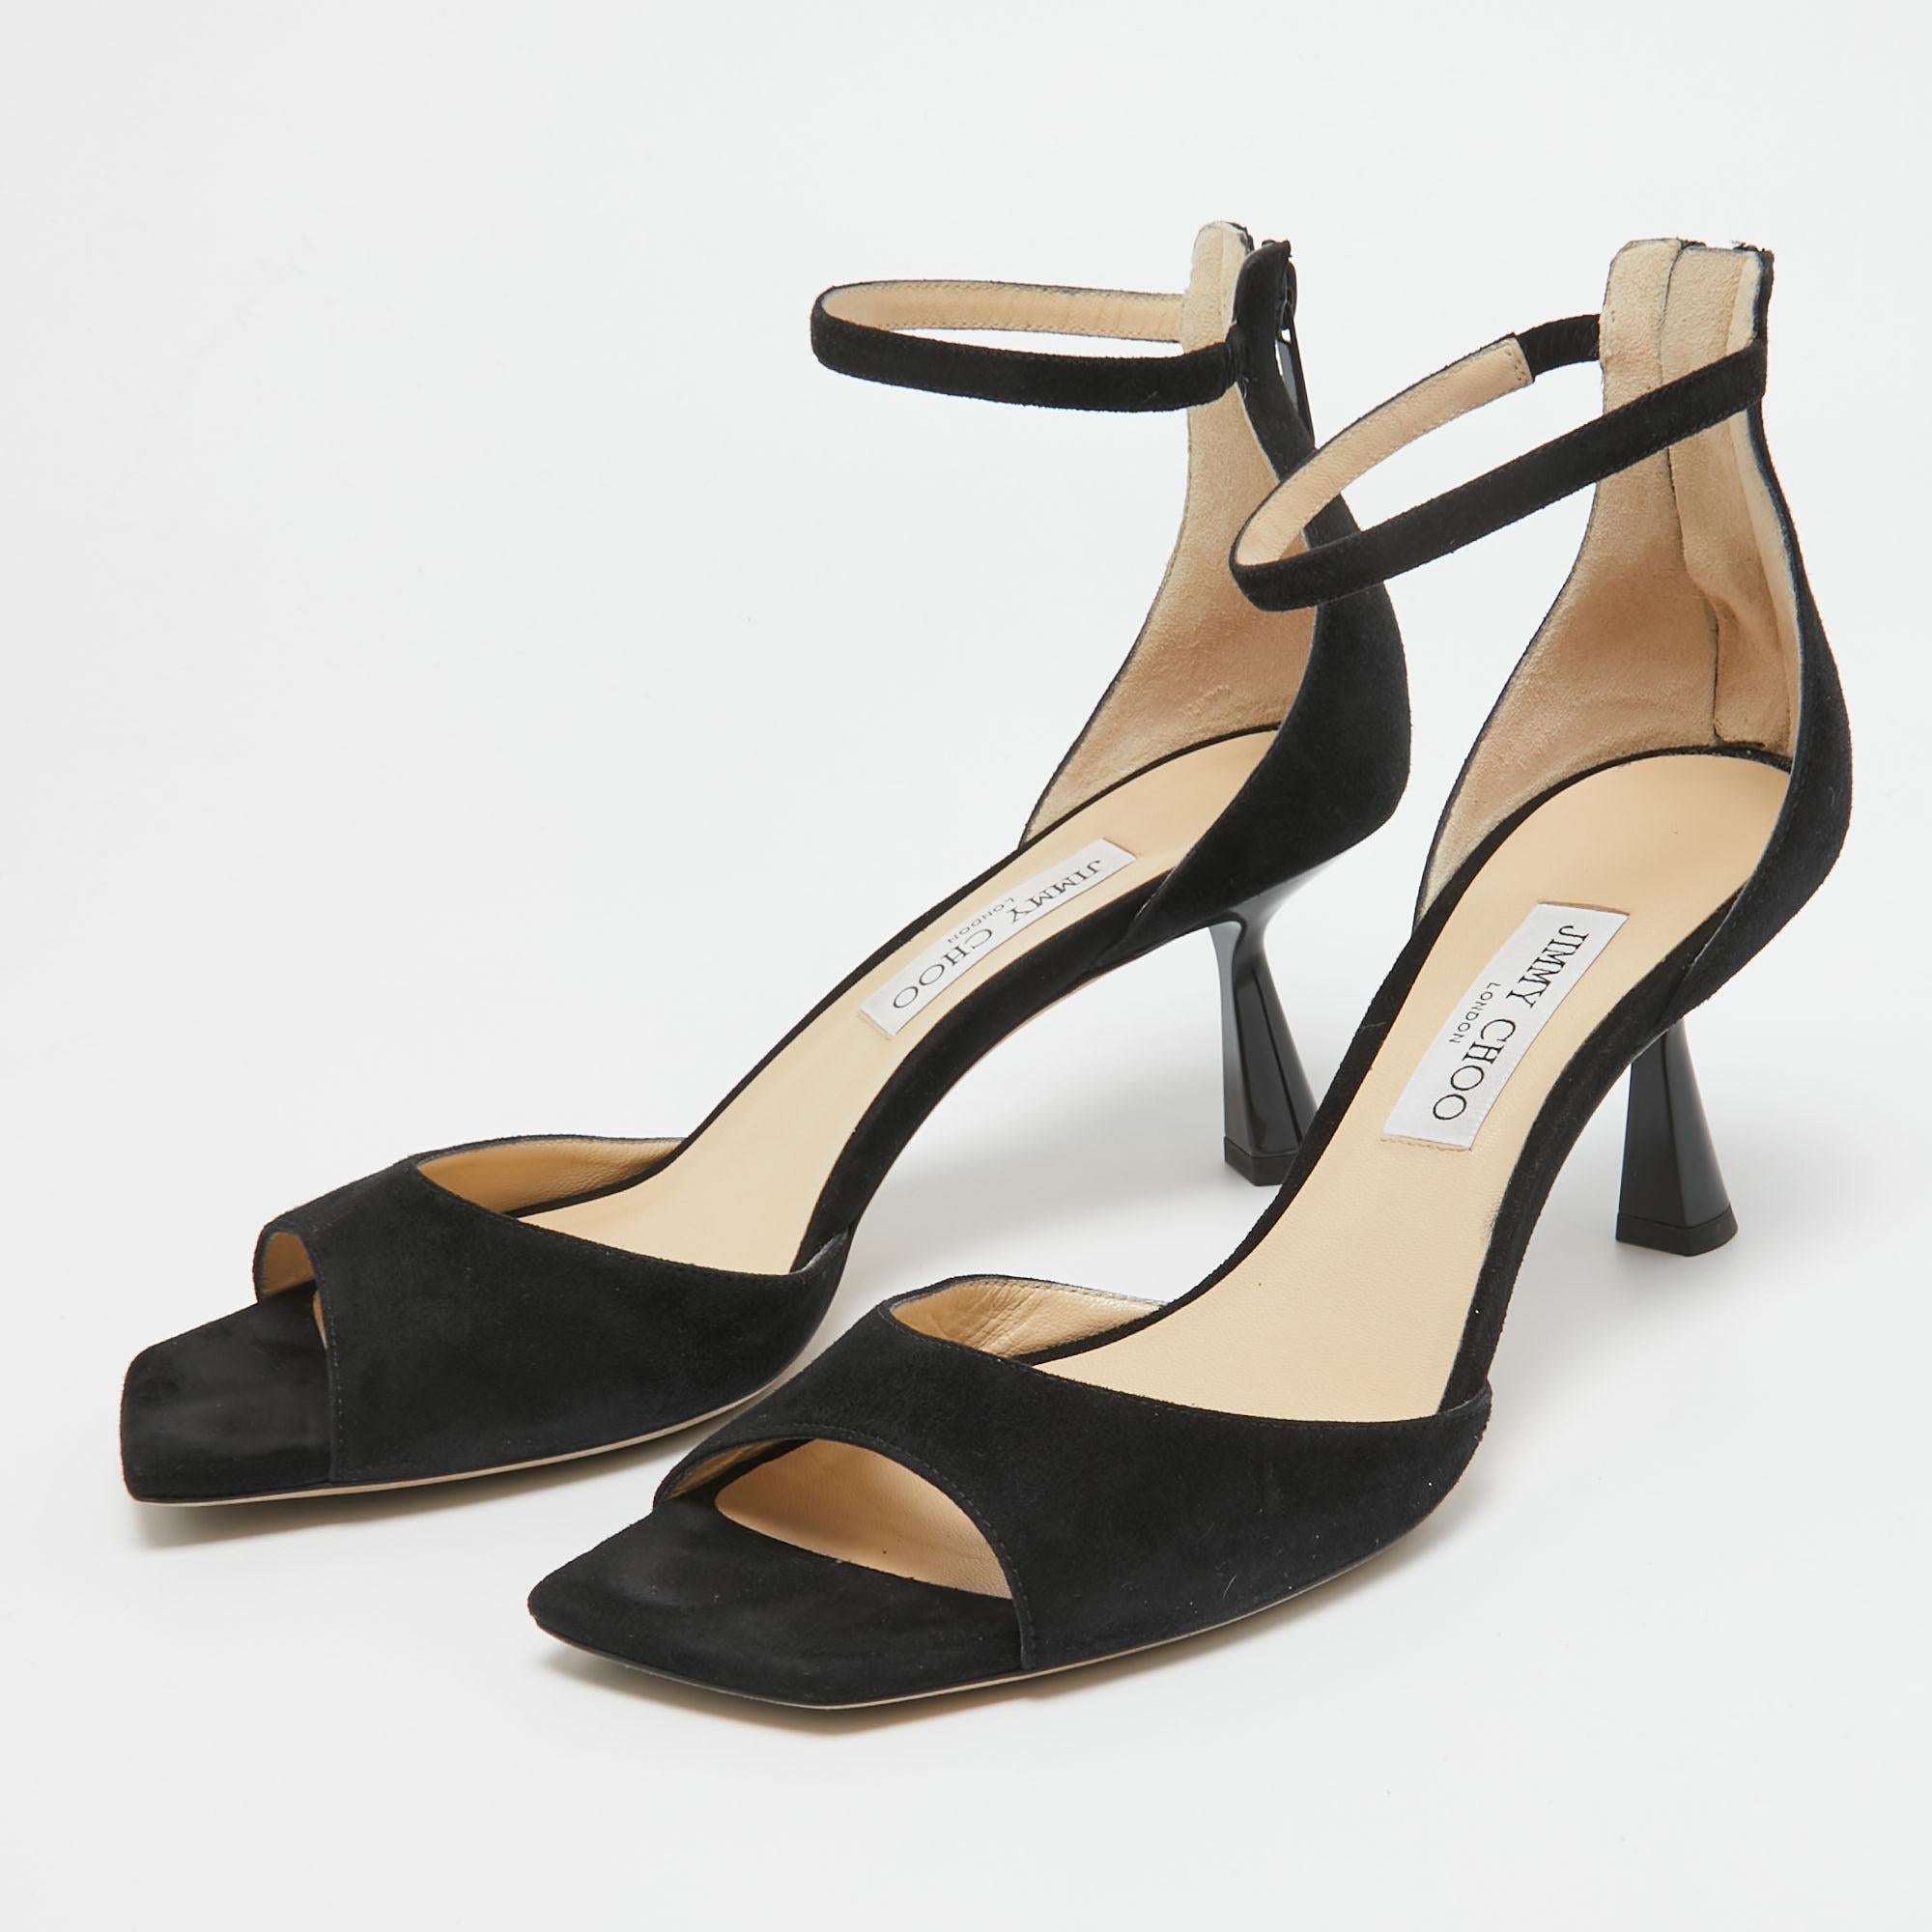 Jimmy Choo Black Suede Reon Sandals Size 41 For Sale 4